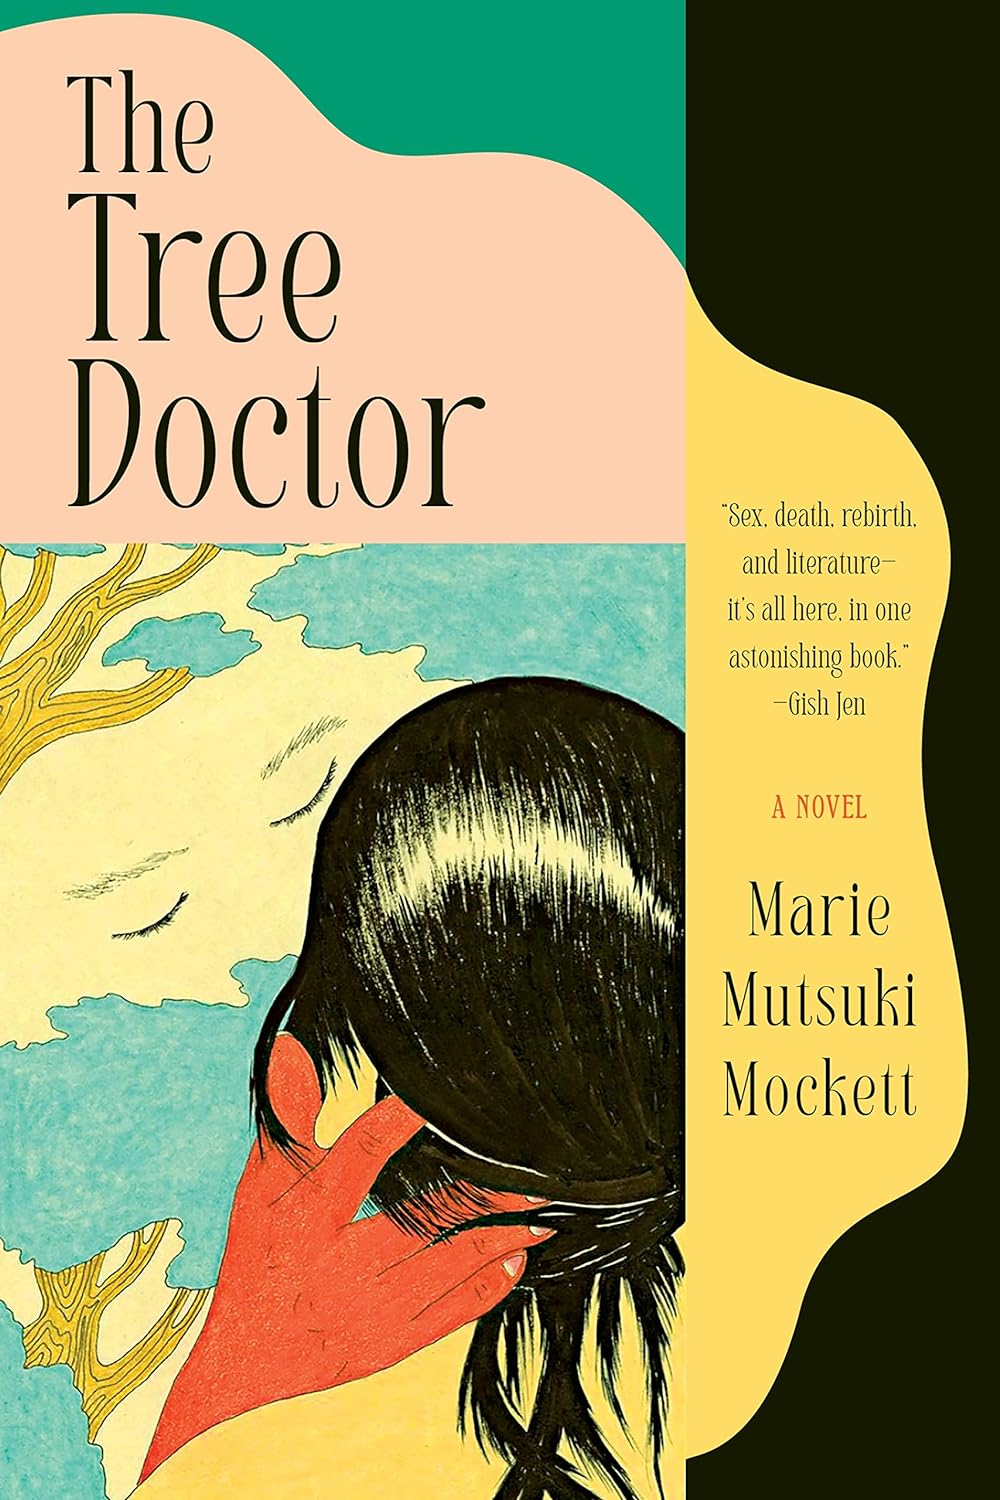 Marie Mutsuki Mockett, <em><a class="external" href=https://lithub.com/the-22-best-book-covers-of-march/"https://bookshop.org/a/132/9781644452776" target="_blank" rel="noopener">The Tree</a><a class="external" href=https://lithub.com/the-22-best-book-covers-of-march/"https://bookshop.org/a/132/9781644452776" target="_blank" rel="noopener"> Doctor</a></em>; cover design by Kimberly Glyder, illustration by Cory Feder (Graywolf, March 19)